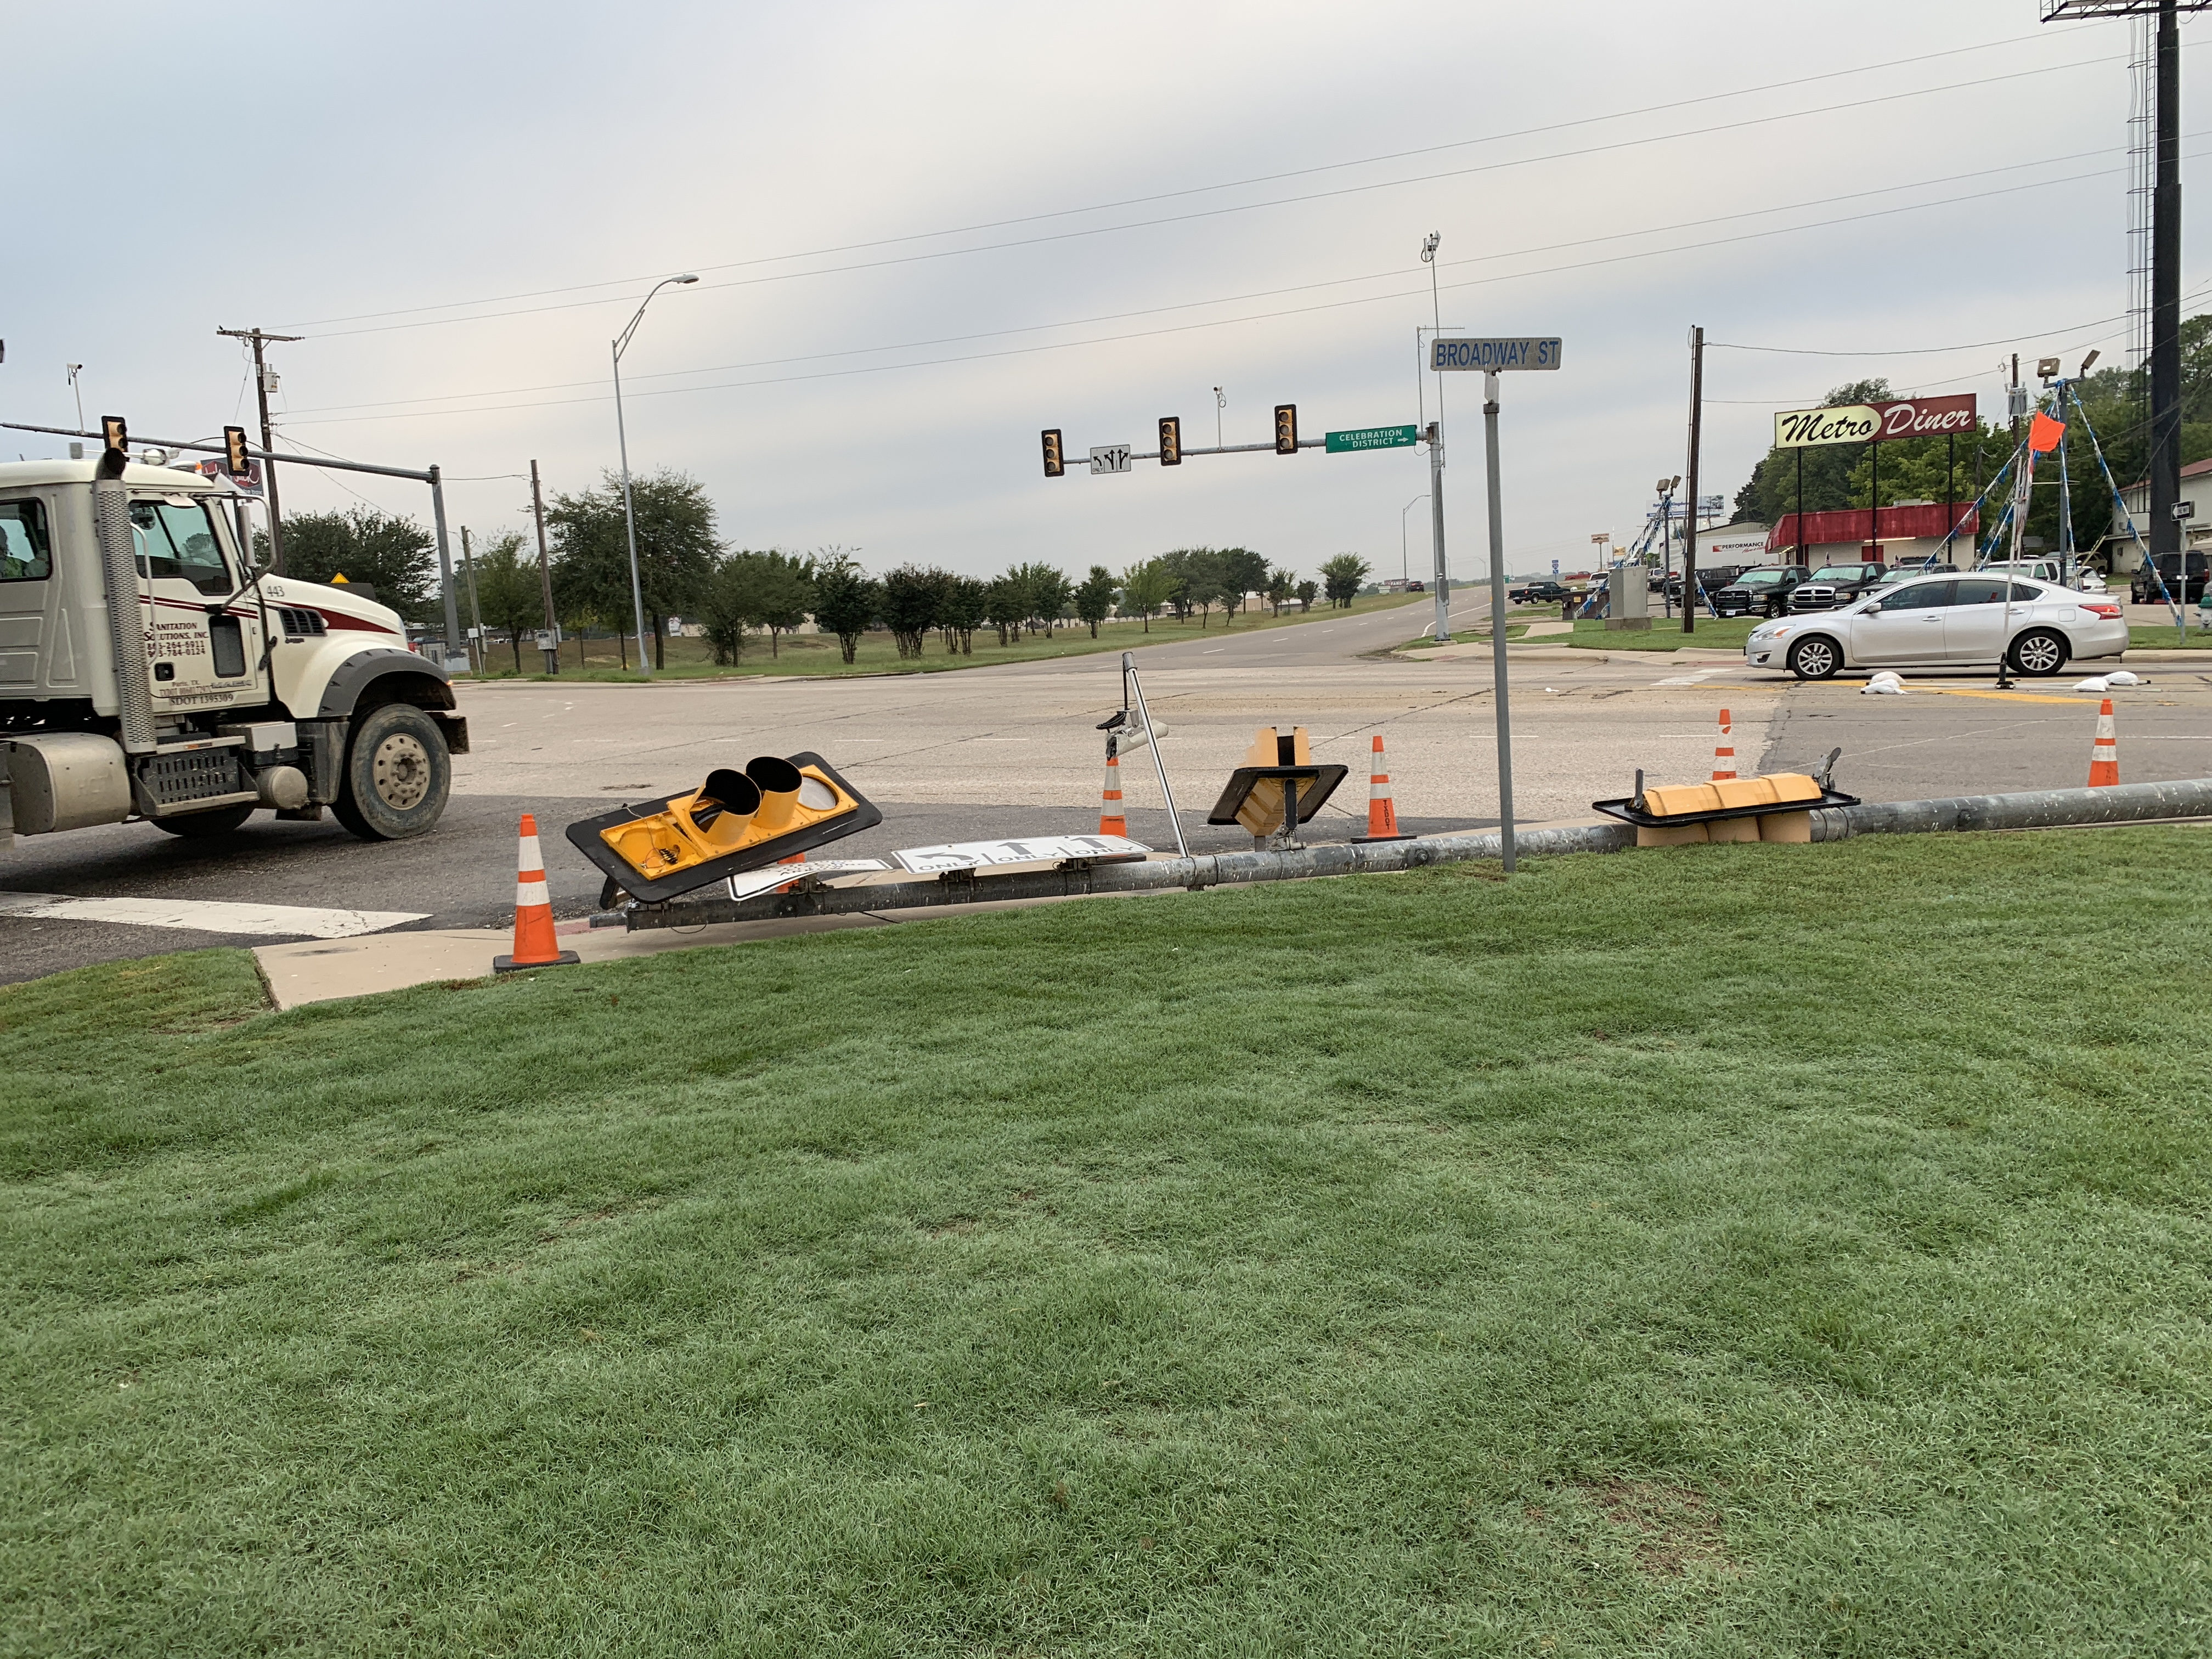 How Long Does It Take TxDOT to Fix the Traffic Light at the Busiest Intersection in Sulphur Springs? TxDOT Says 7-10 More Days. Total Repair Time on Track for 14-17 Days.